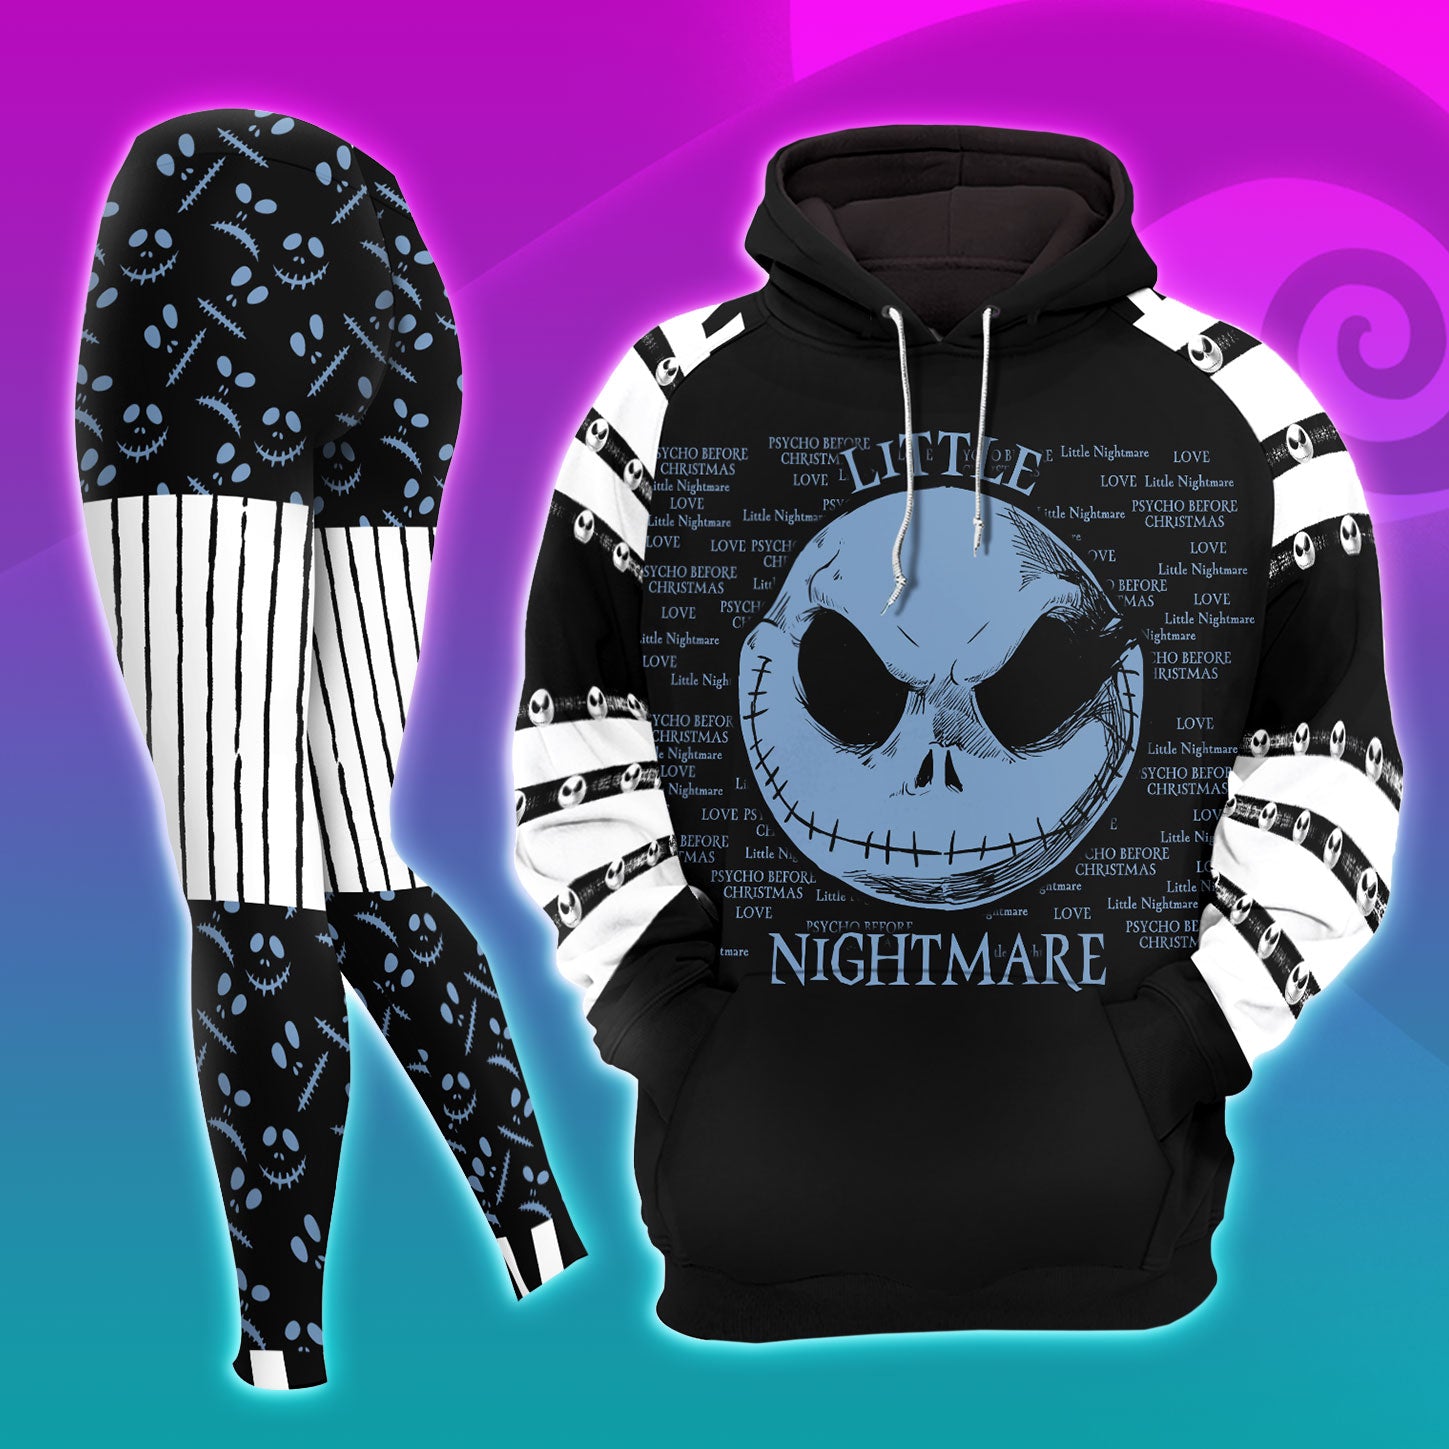 Love Nightmare Theme Combo Hoodie and Leggings - Dark and edgy matching set with skull designs for a unique and stylish look.